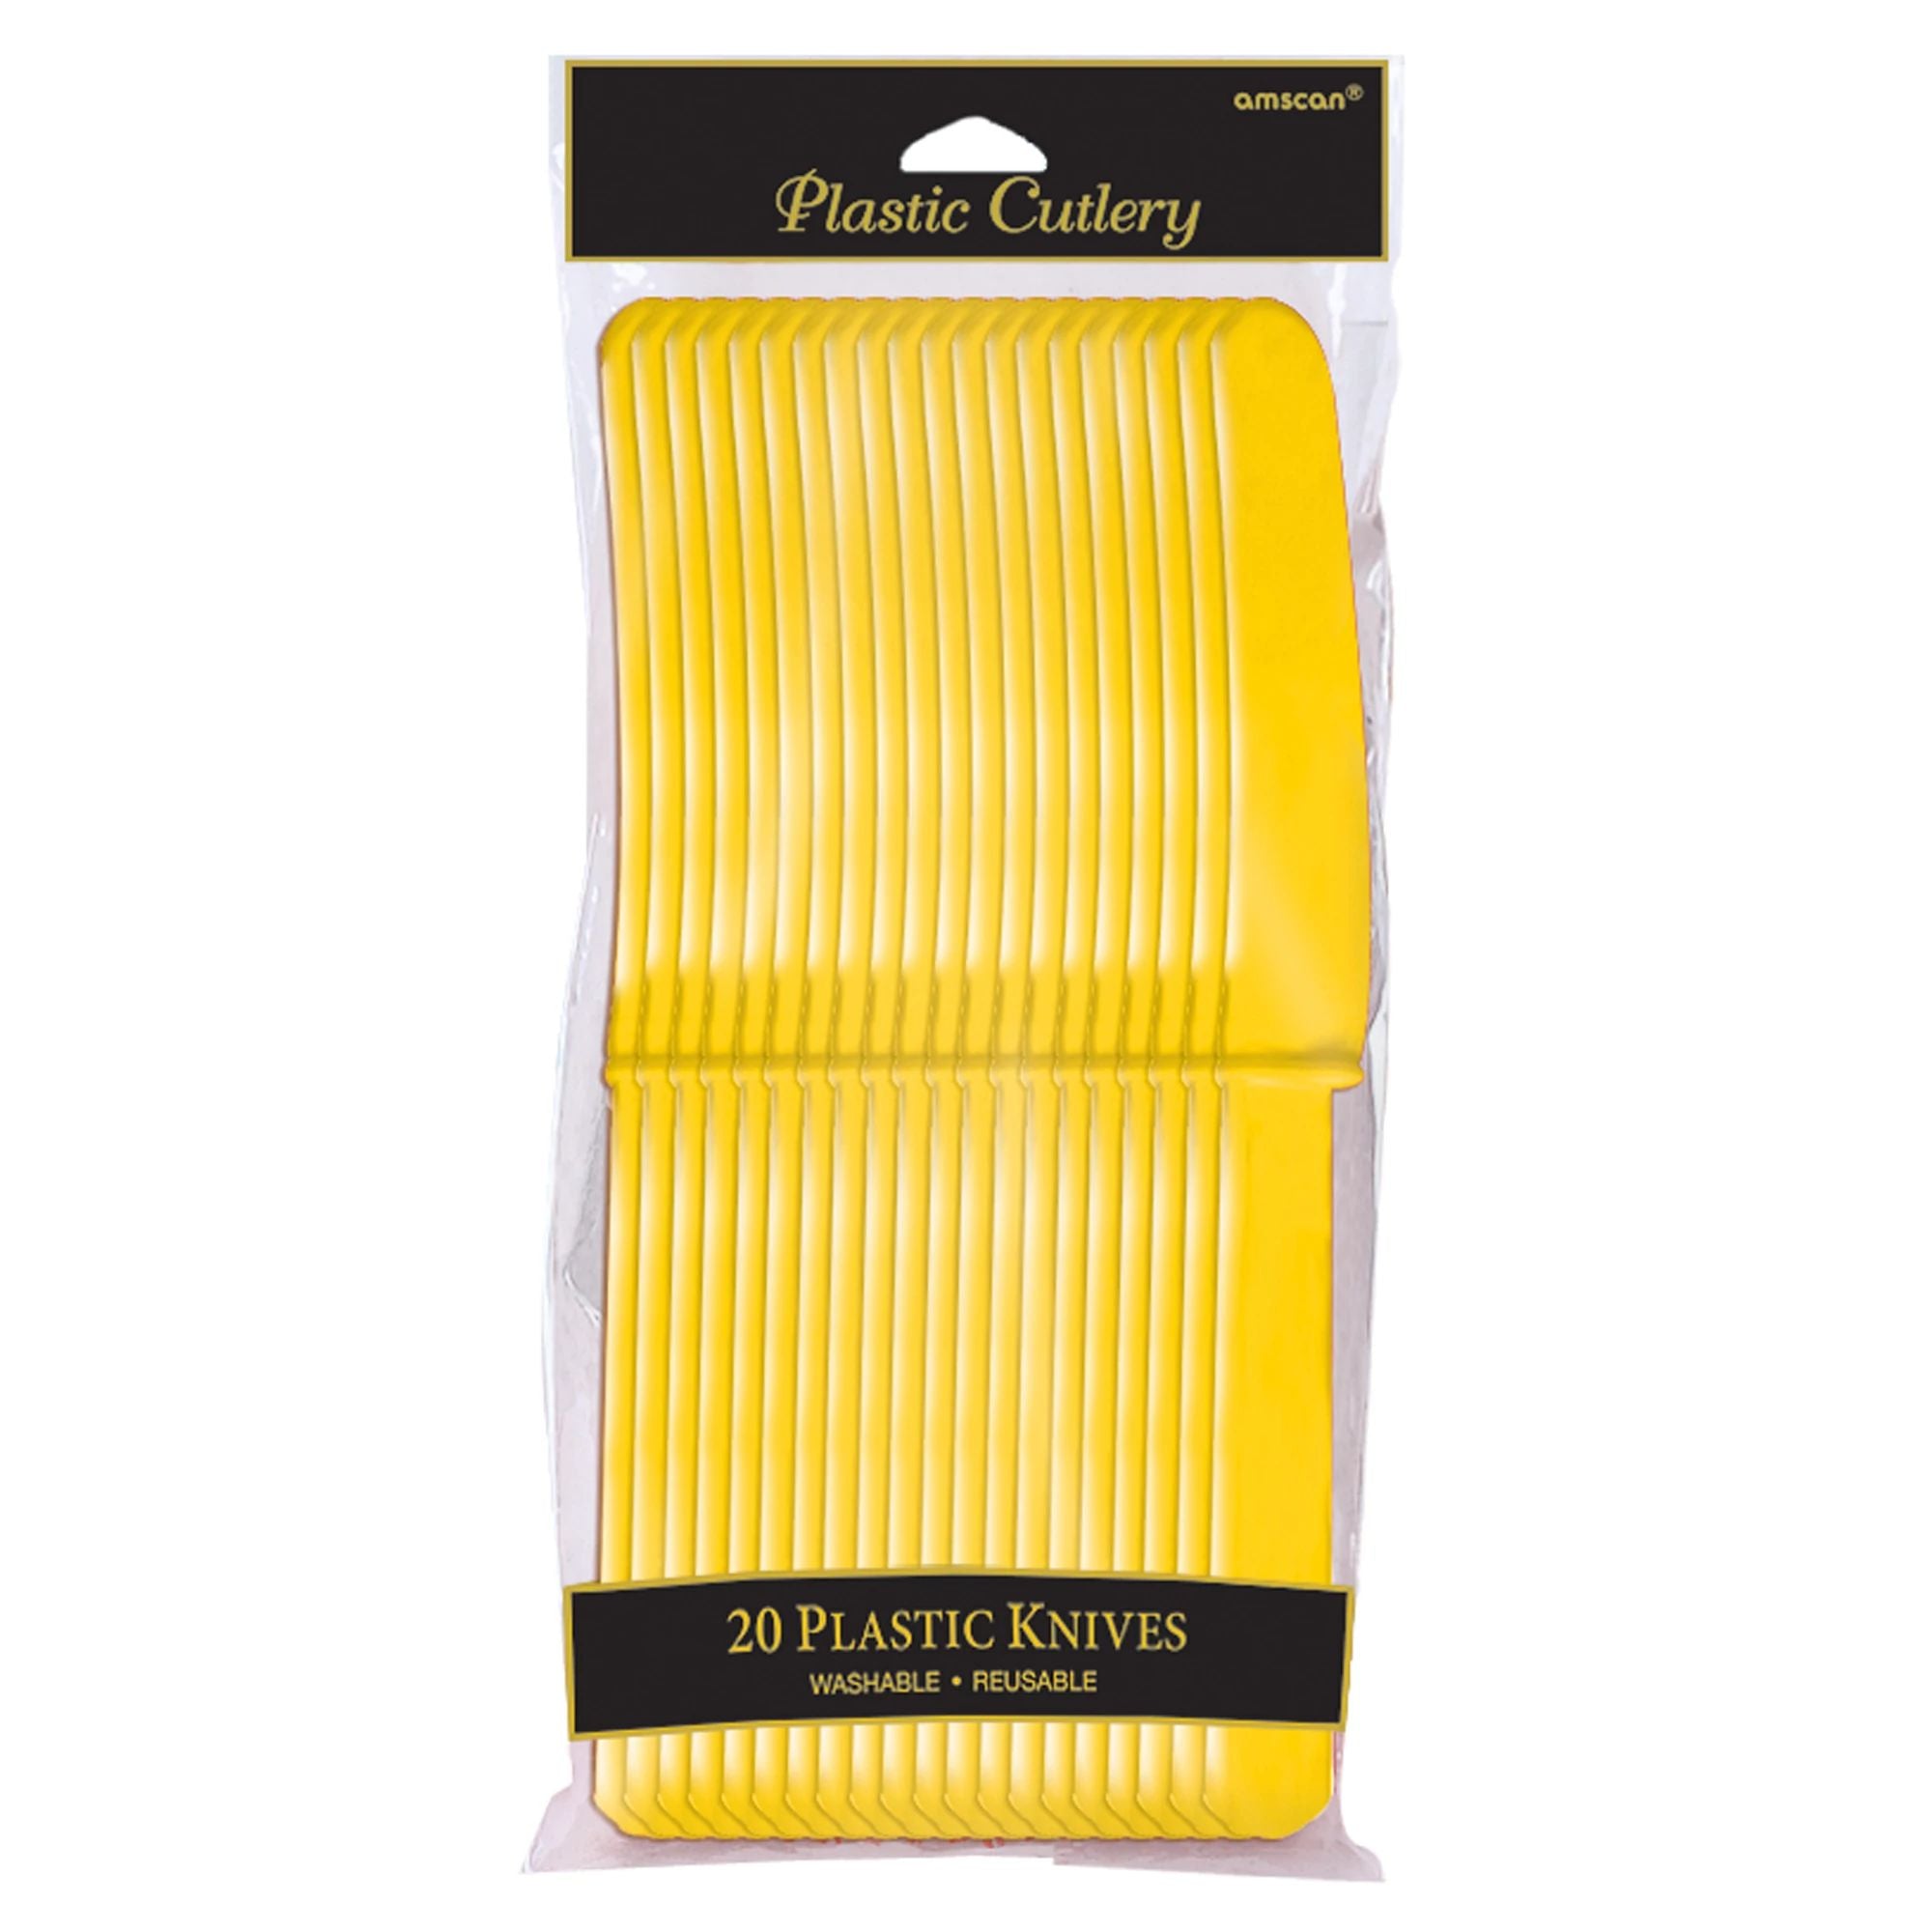 Plastic Knives - Sunshine Yellow - 24CT (Old Stock)